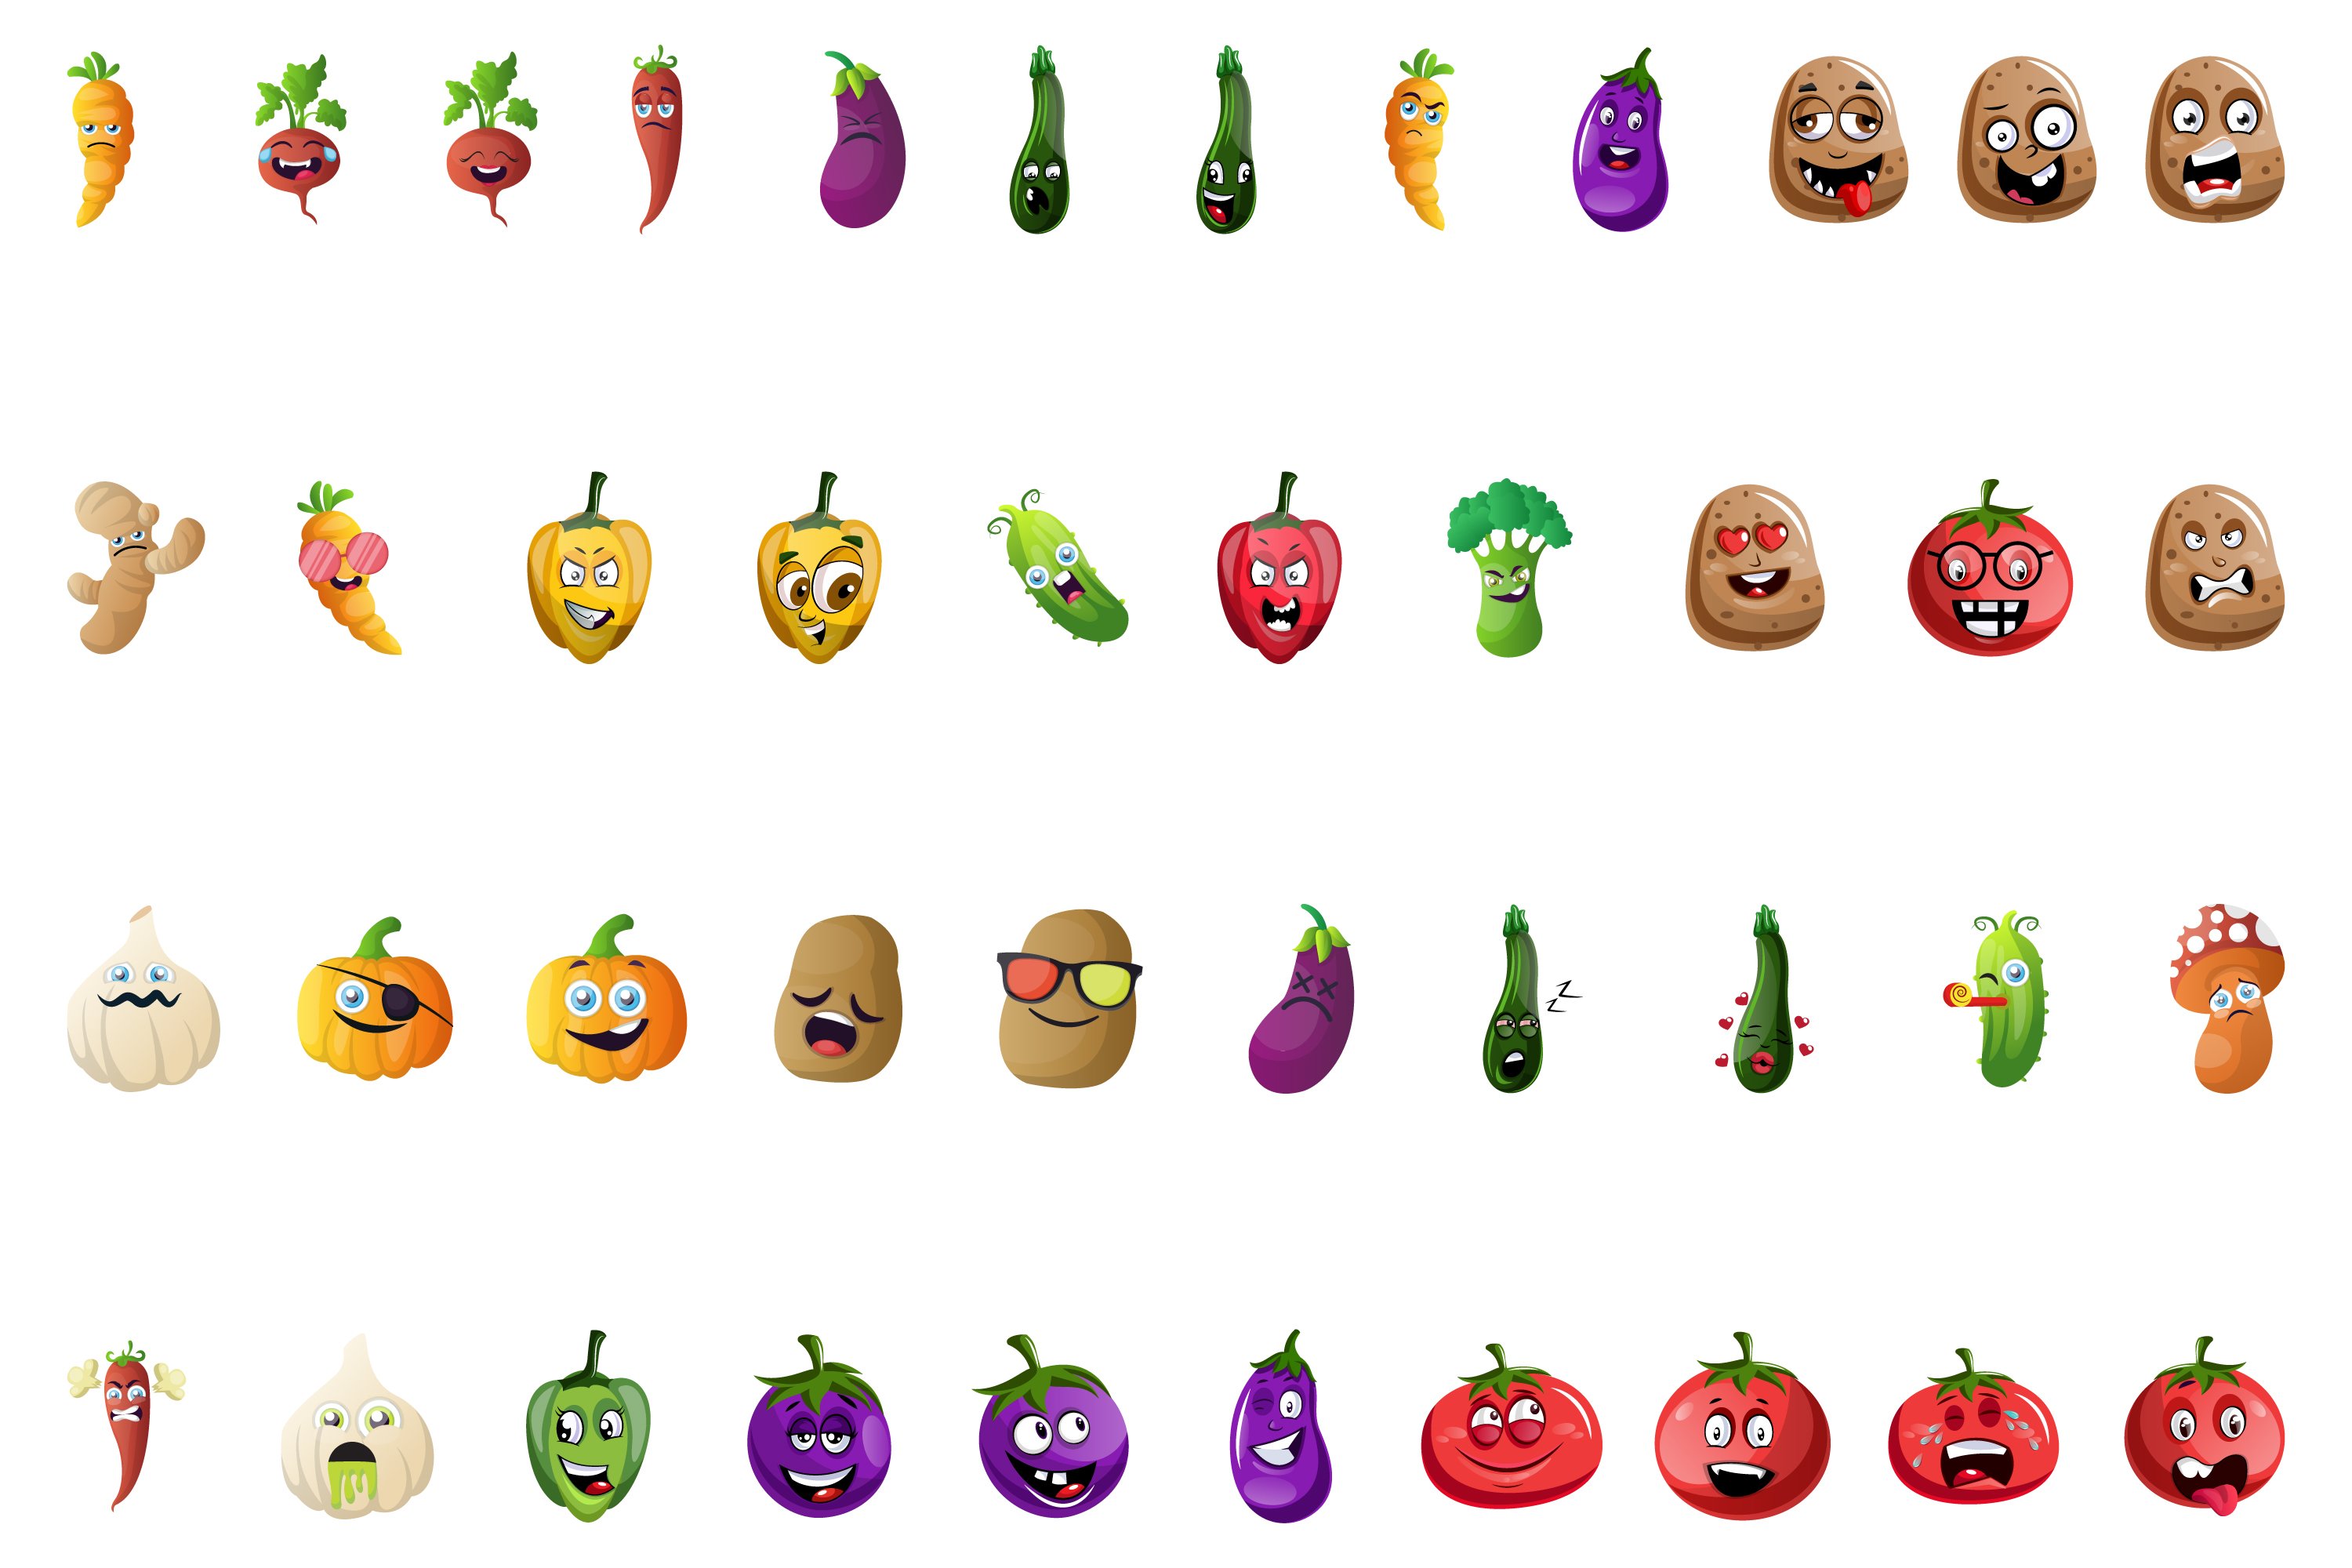 Diverse of vegetables for the food illustrations.